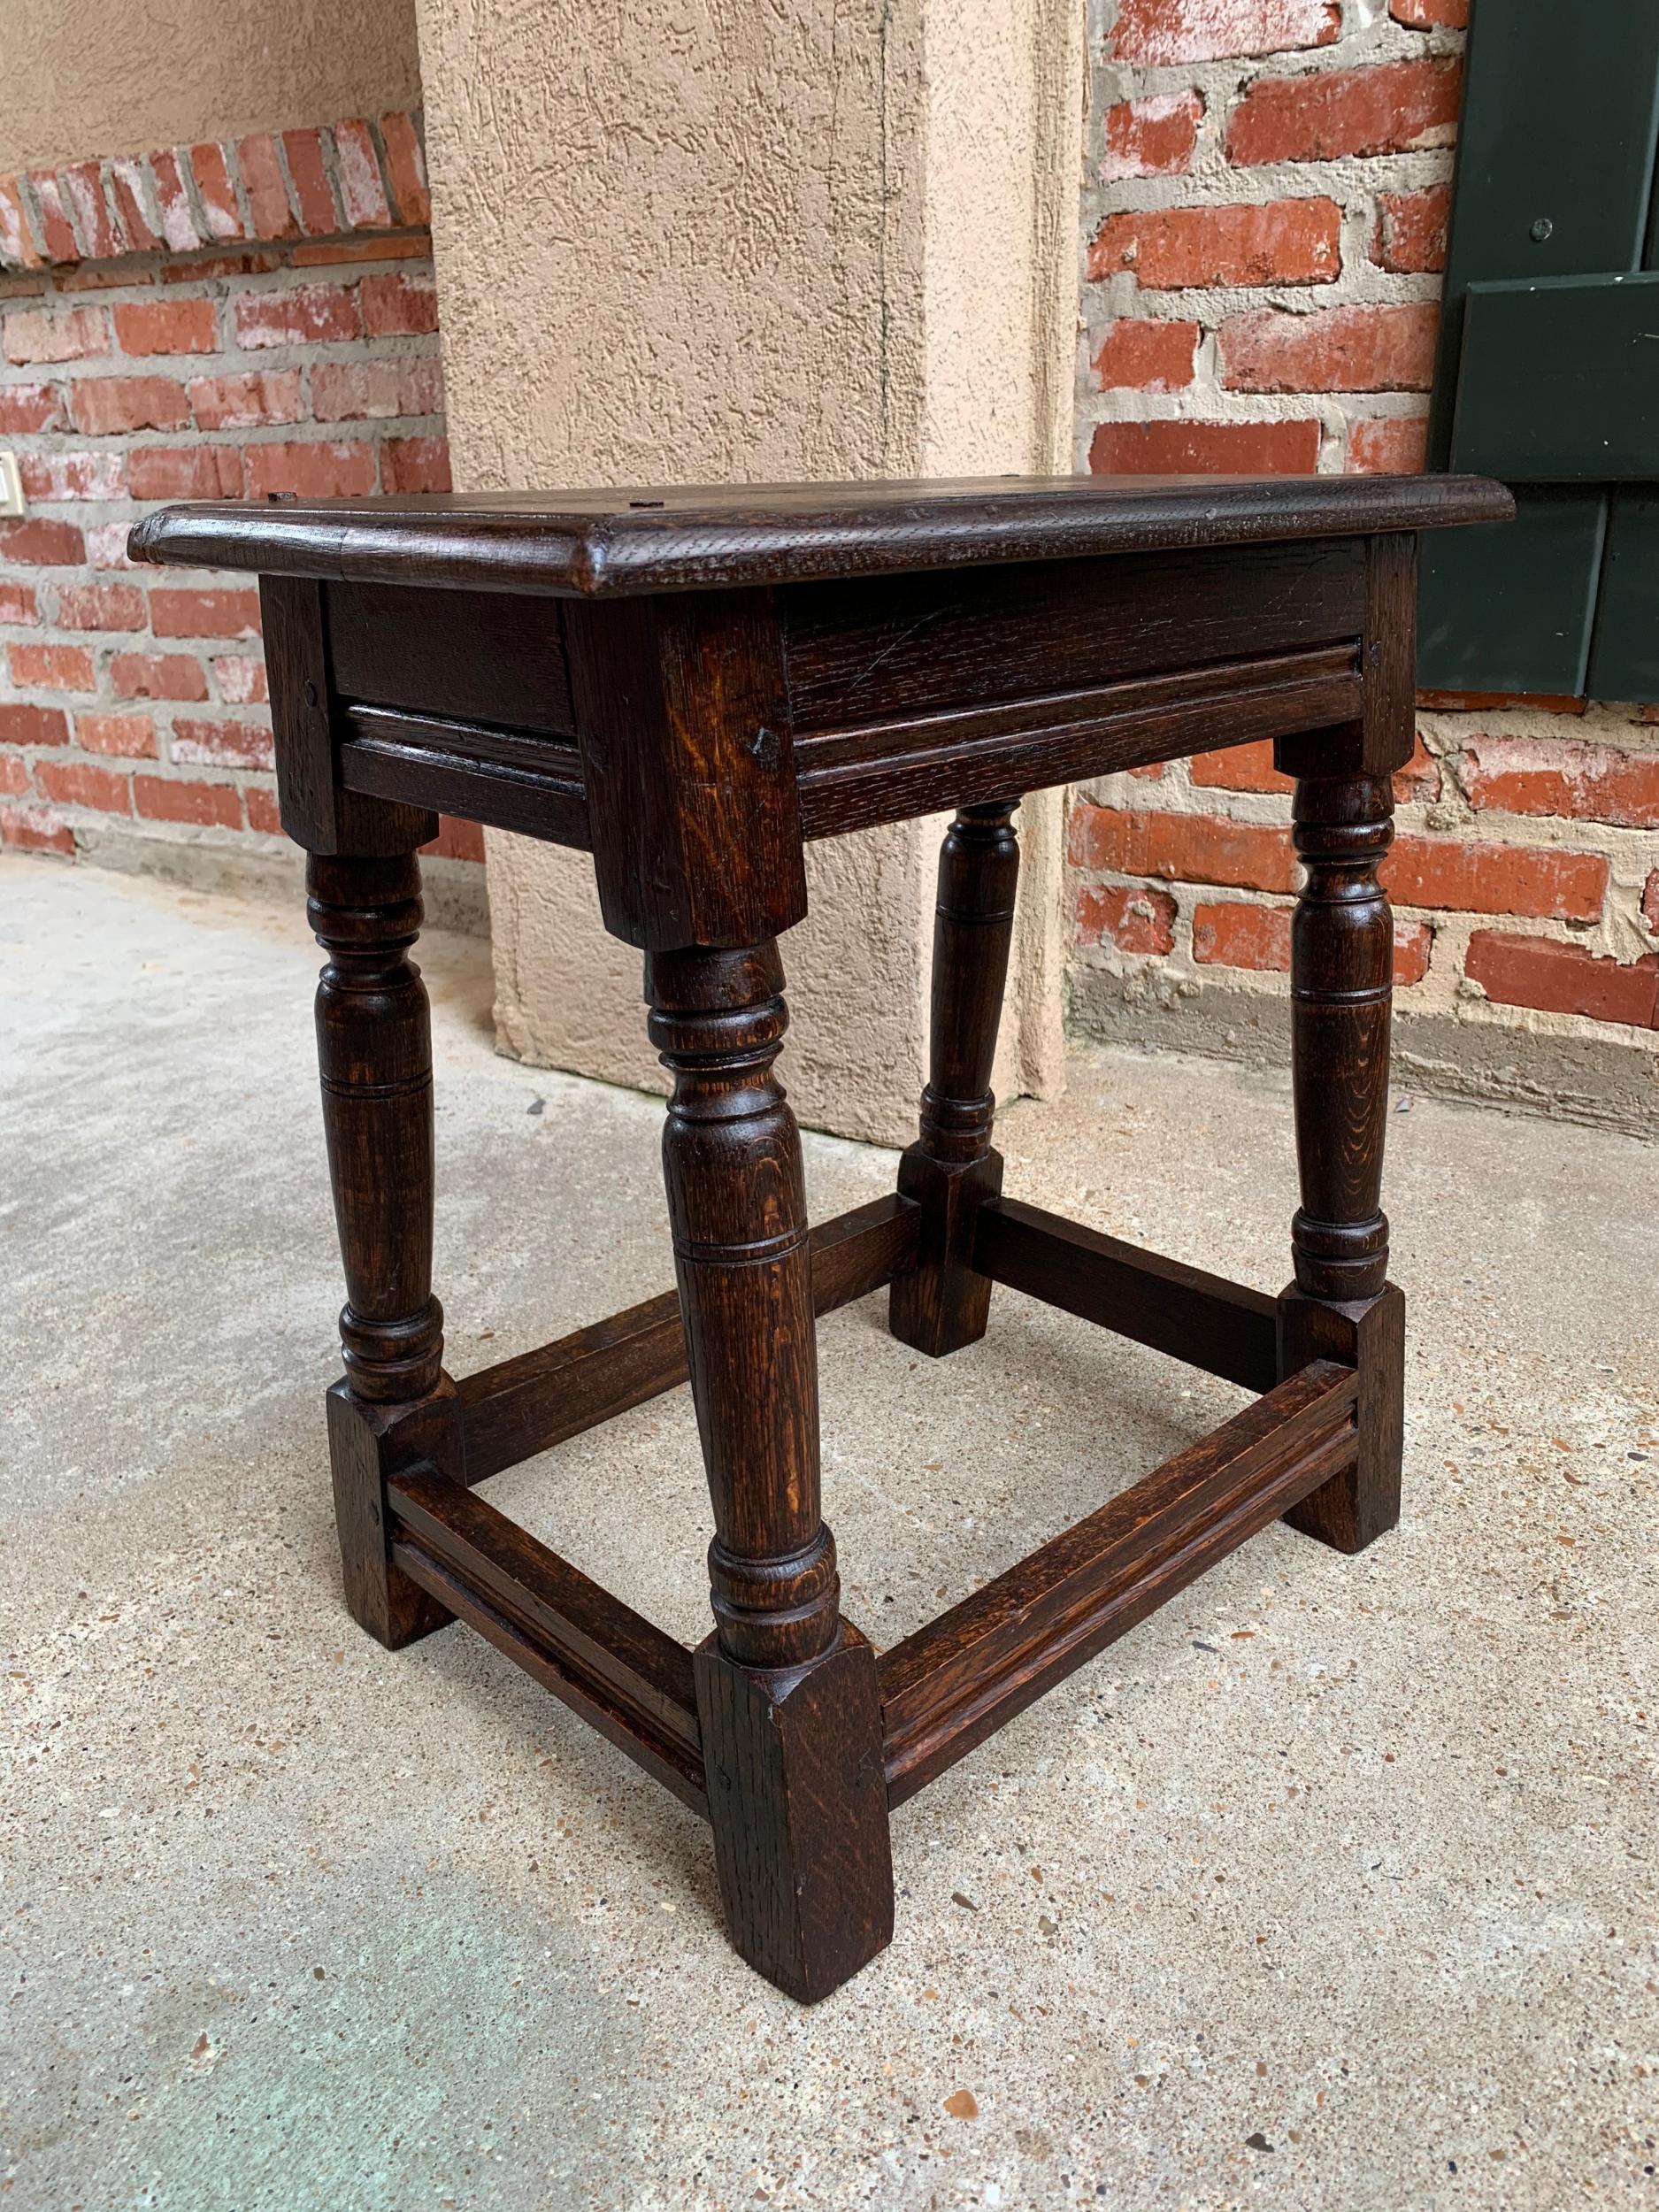 Antique English oak stool pegged joint side end table, 20th century

~ Direct from English
~ One of several outstanding small carved oak antique “joint stools” from our last buying trip
~ This one is an English Classic pegged “joint” stool, with